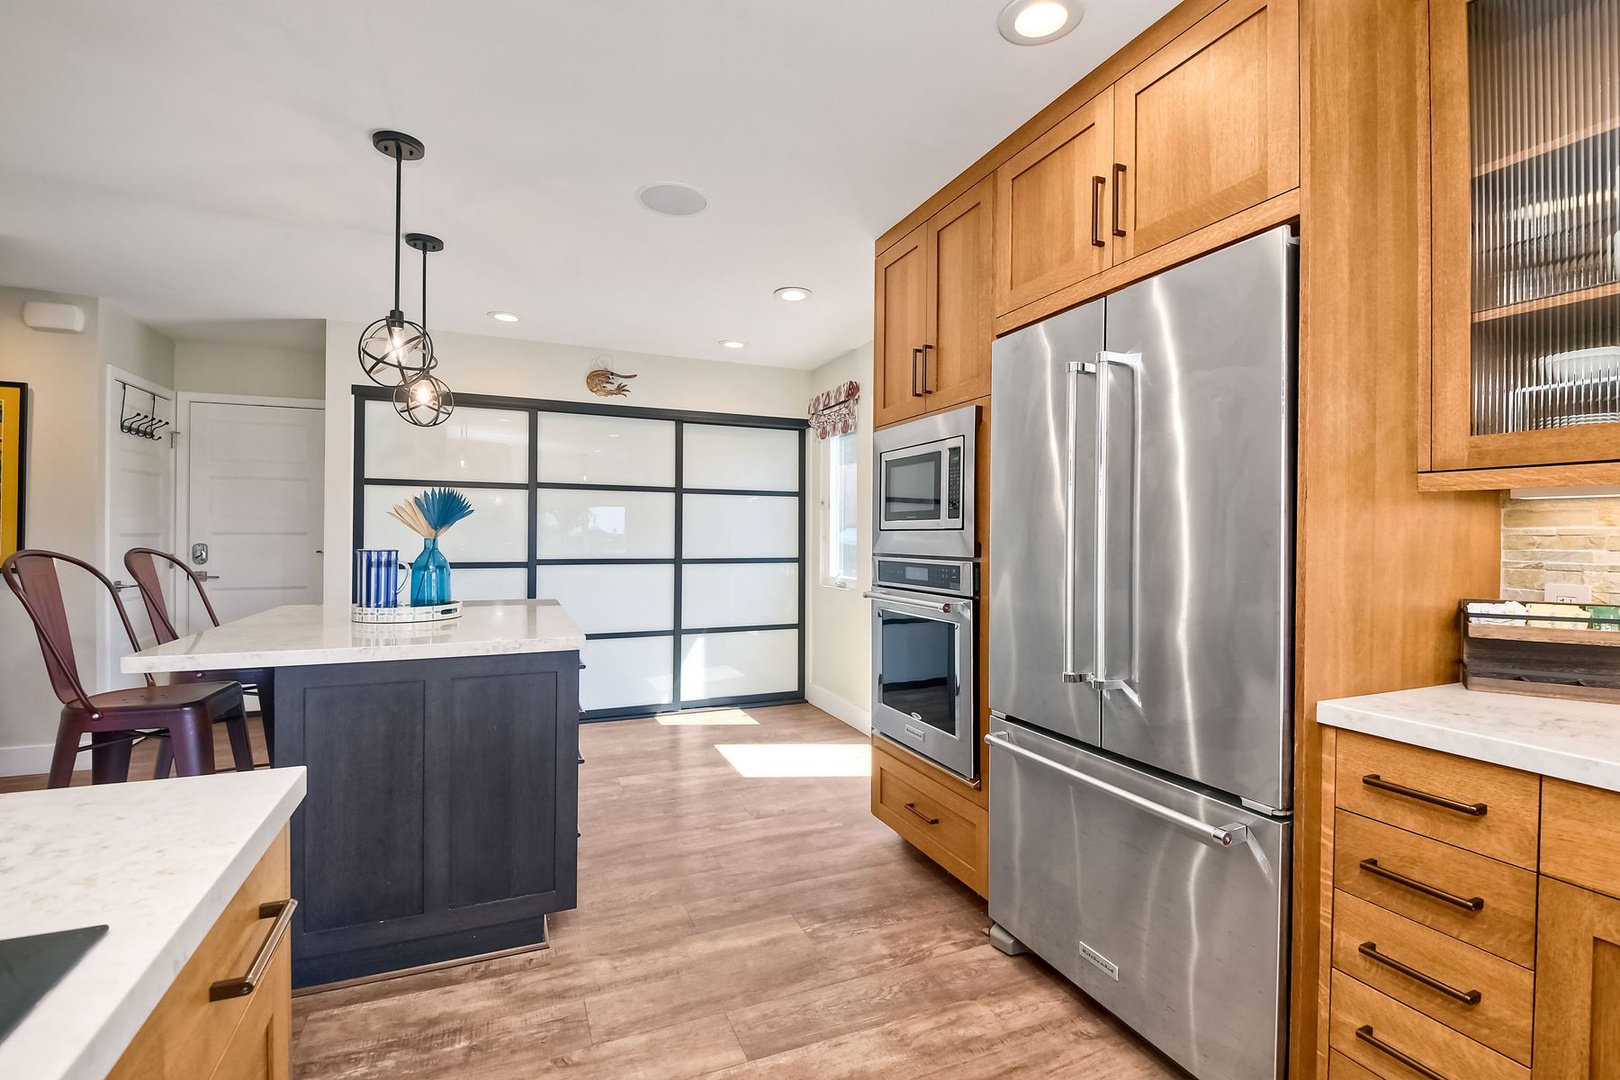 The updated kitchen is spacious & offers all the comforts of home